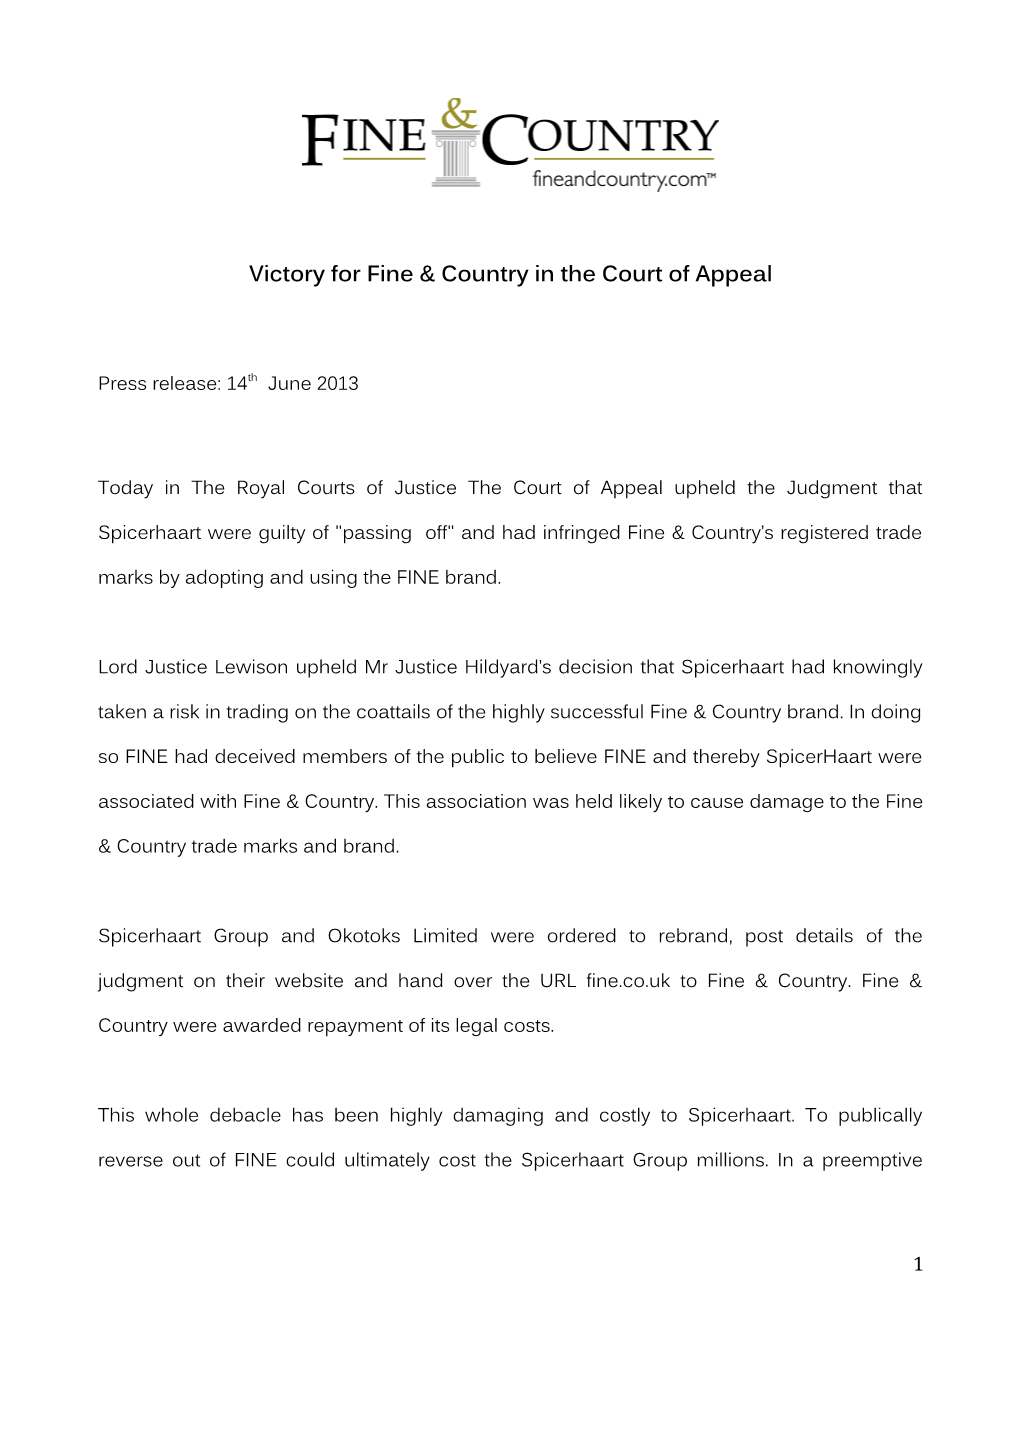 Victory for Fine & Country in the Court of Appeal